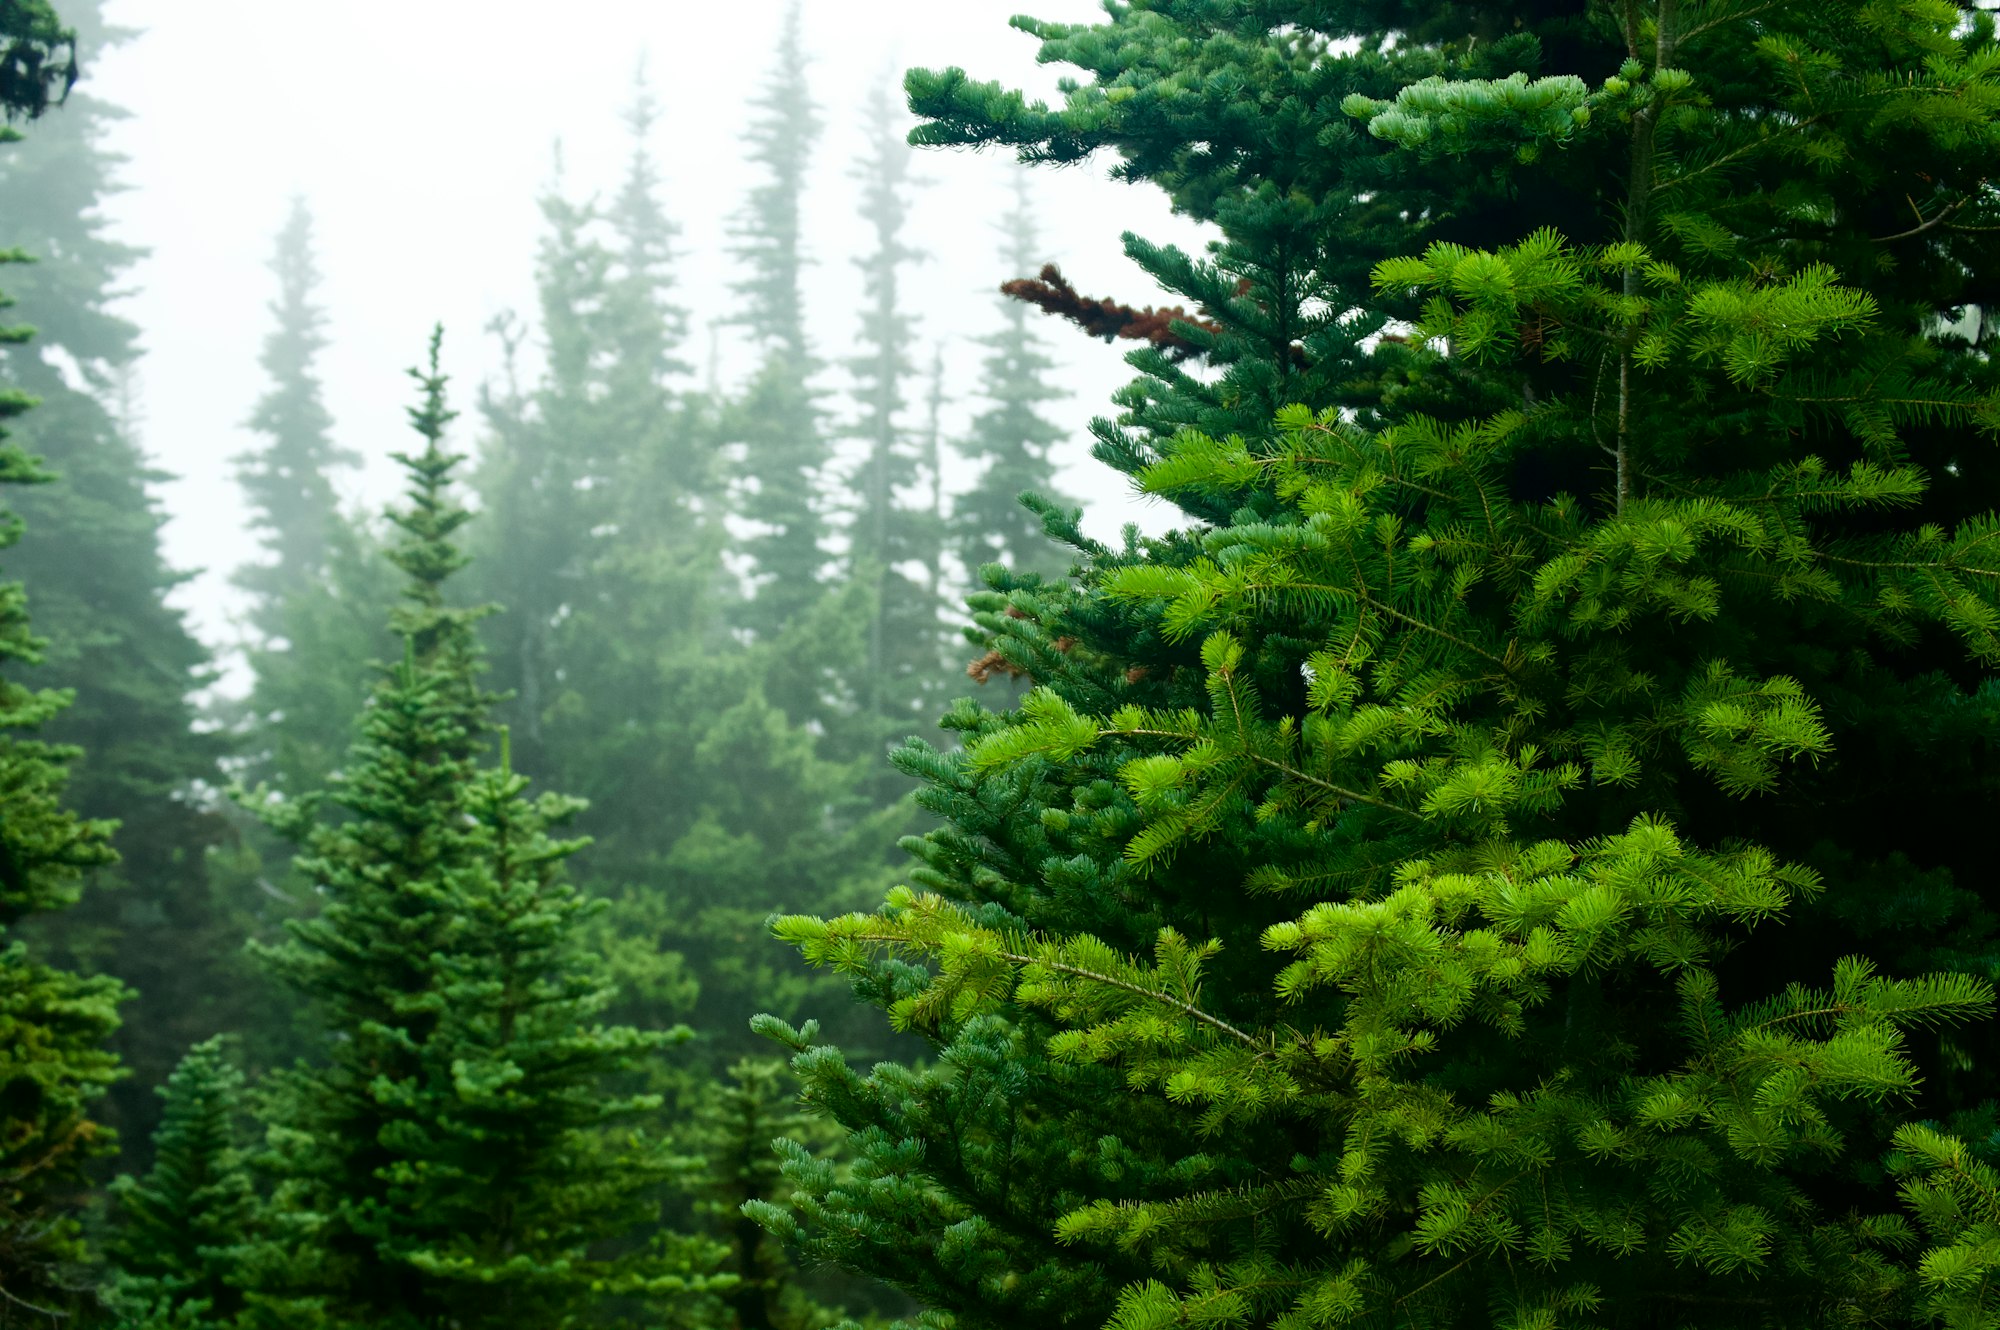 Foggy morning, evergreen trees in the forest - wornbee.com